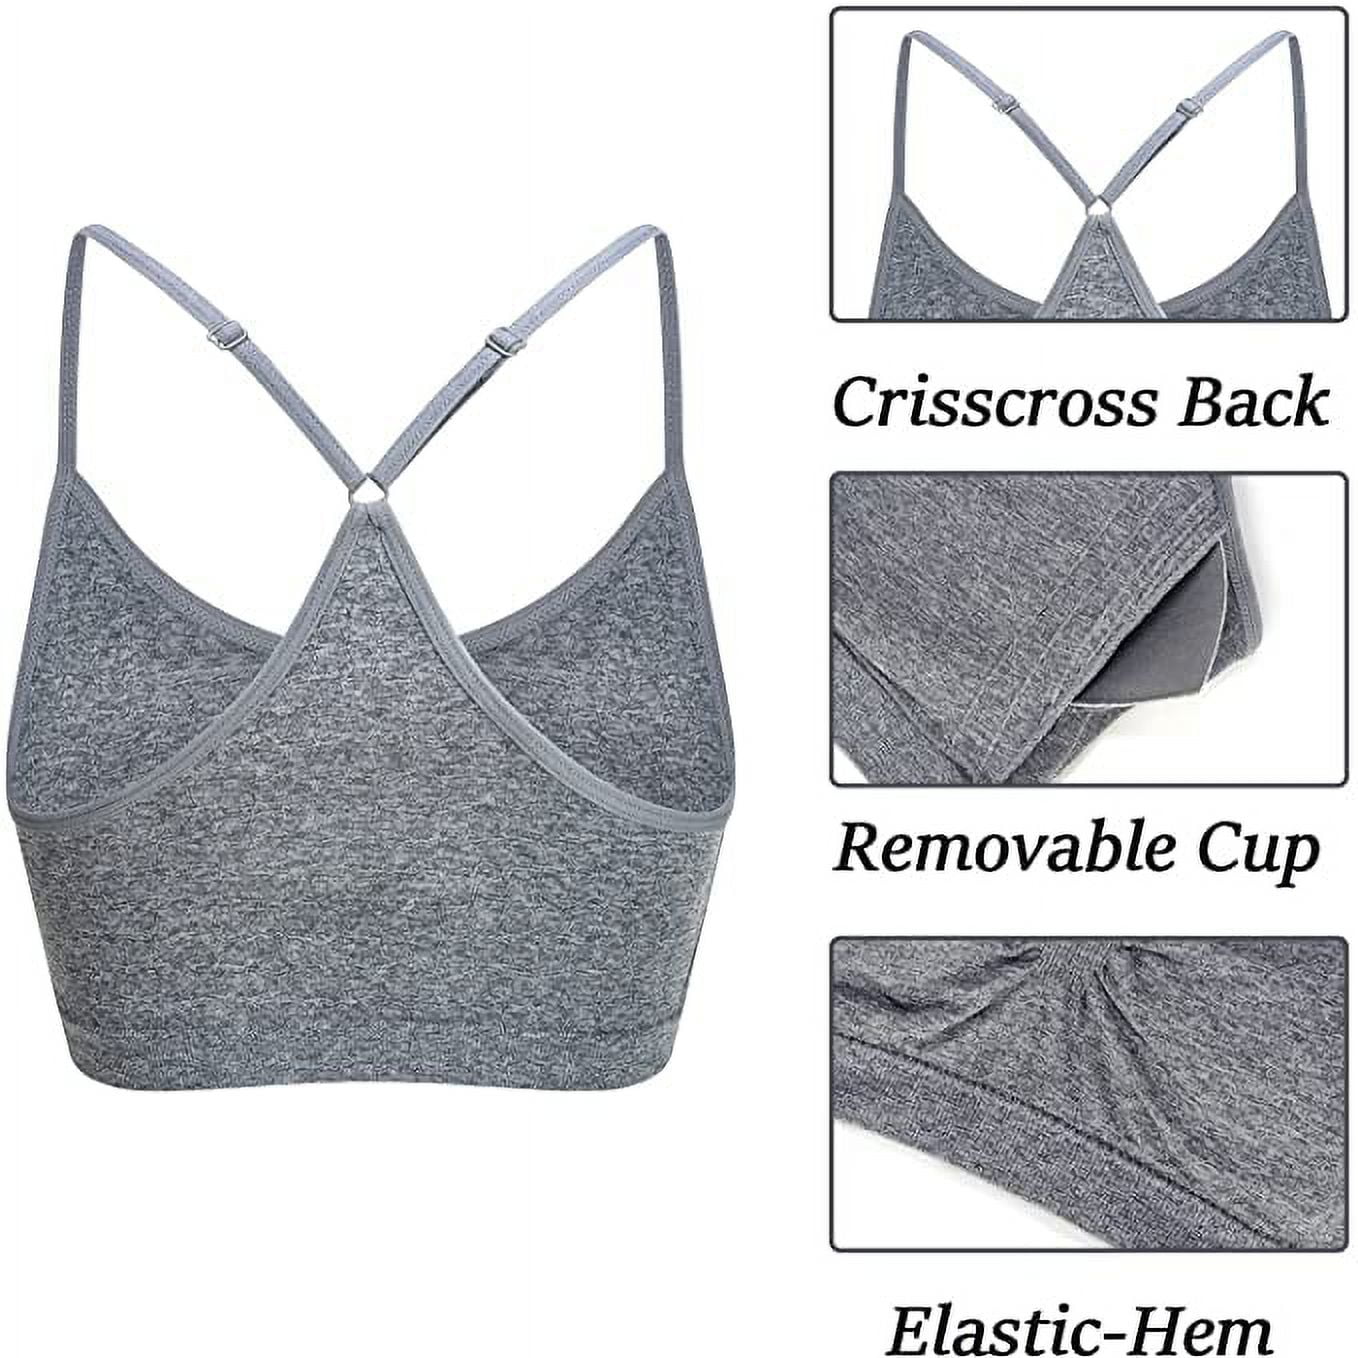 Womens Lace Sports Bra Set Casual, Sexy, And Perfect For Fitness, Yoga,  Workouts, Travel Includes Pad, Black Lace Vest Top, Tank, Bras, Or Black  Lace Vest Top From Sunwukongli, $6.33